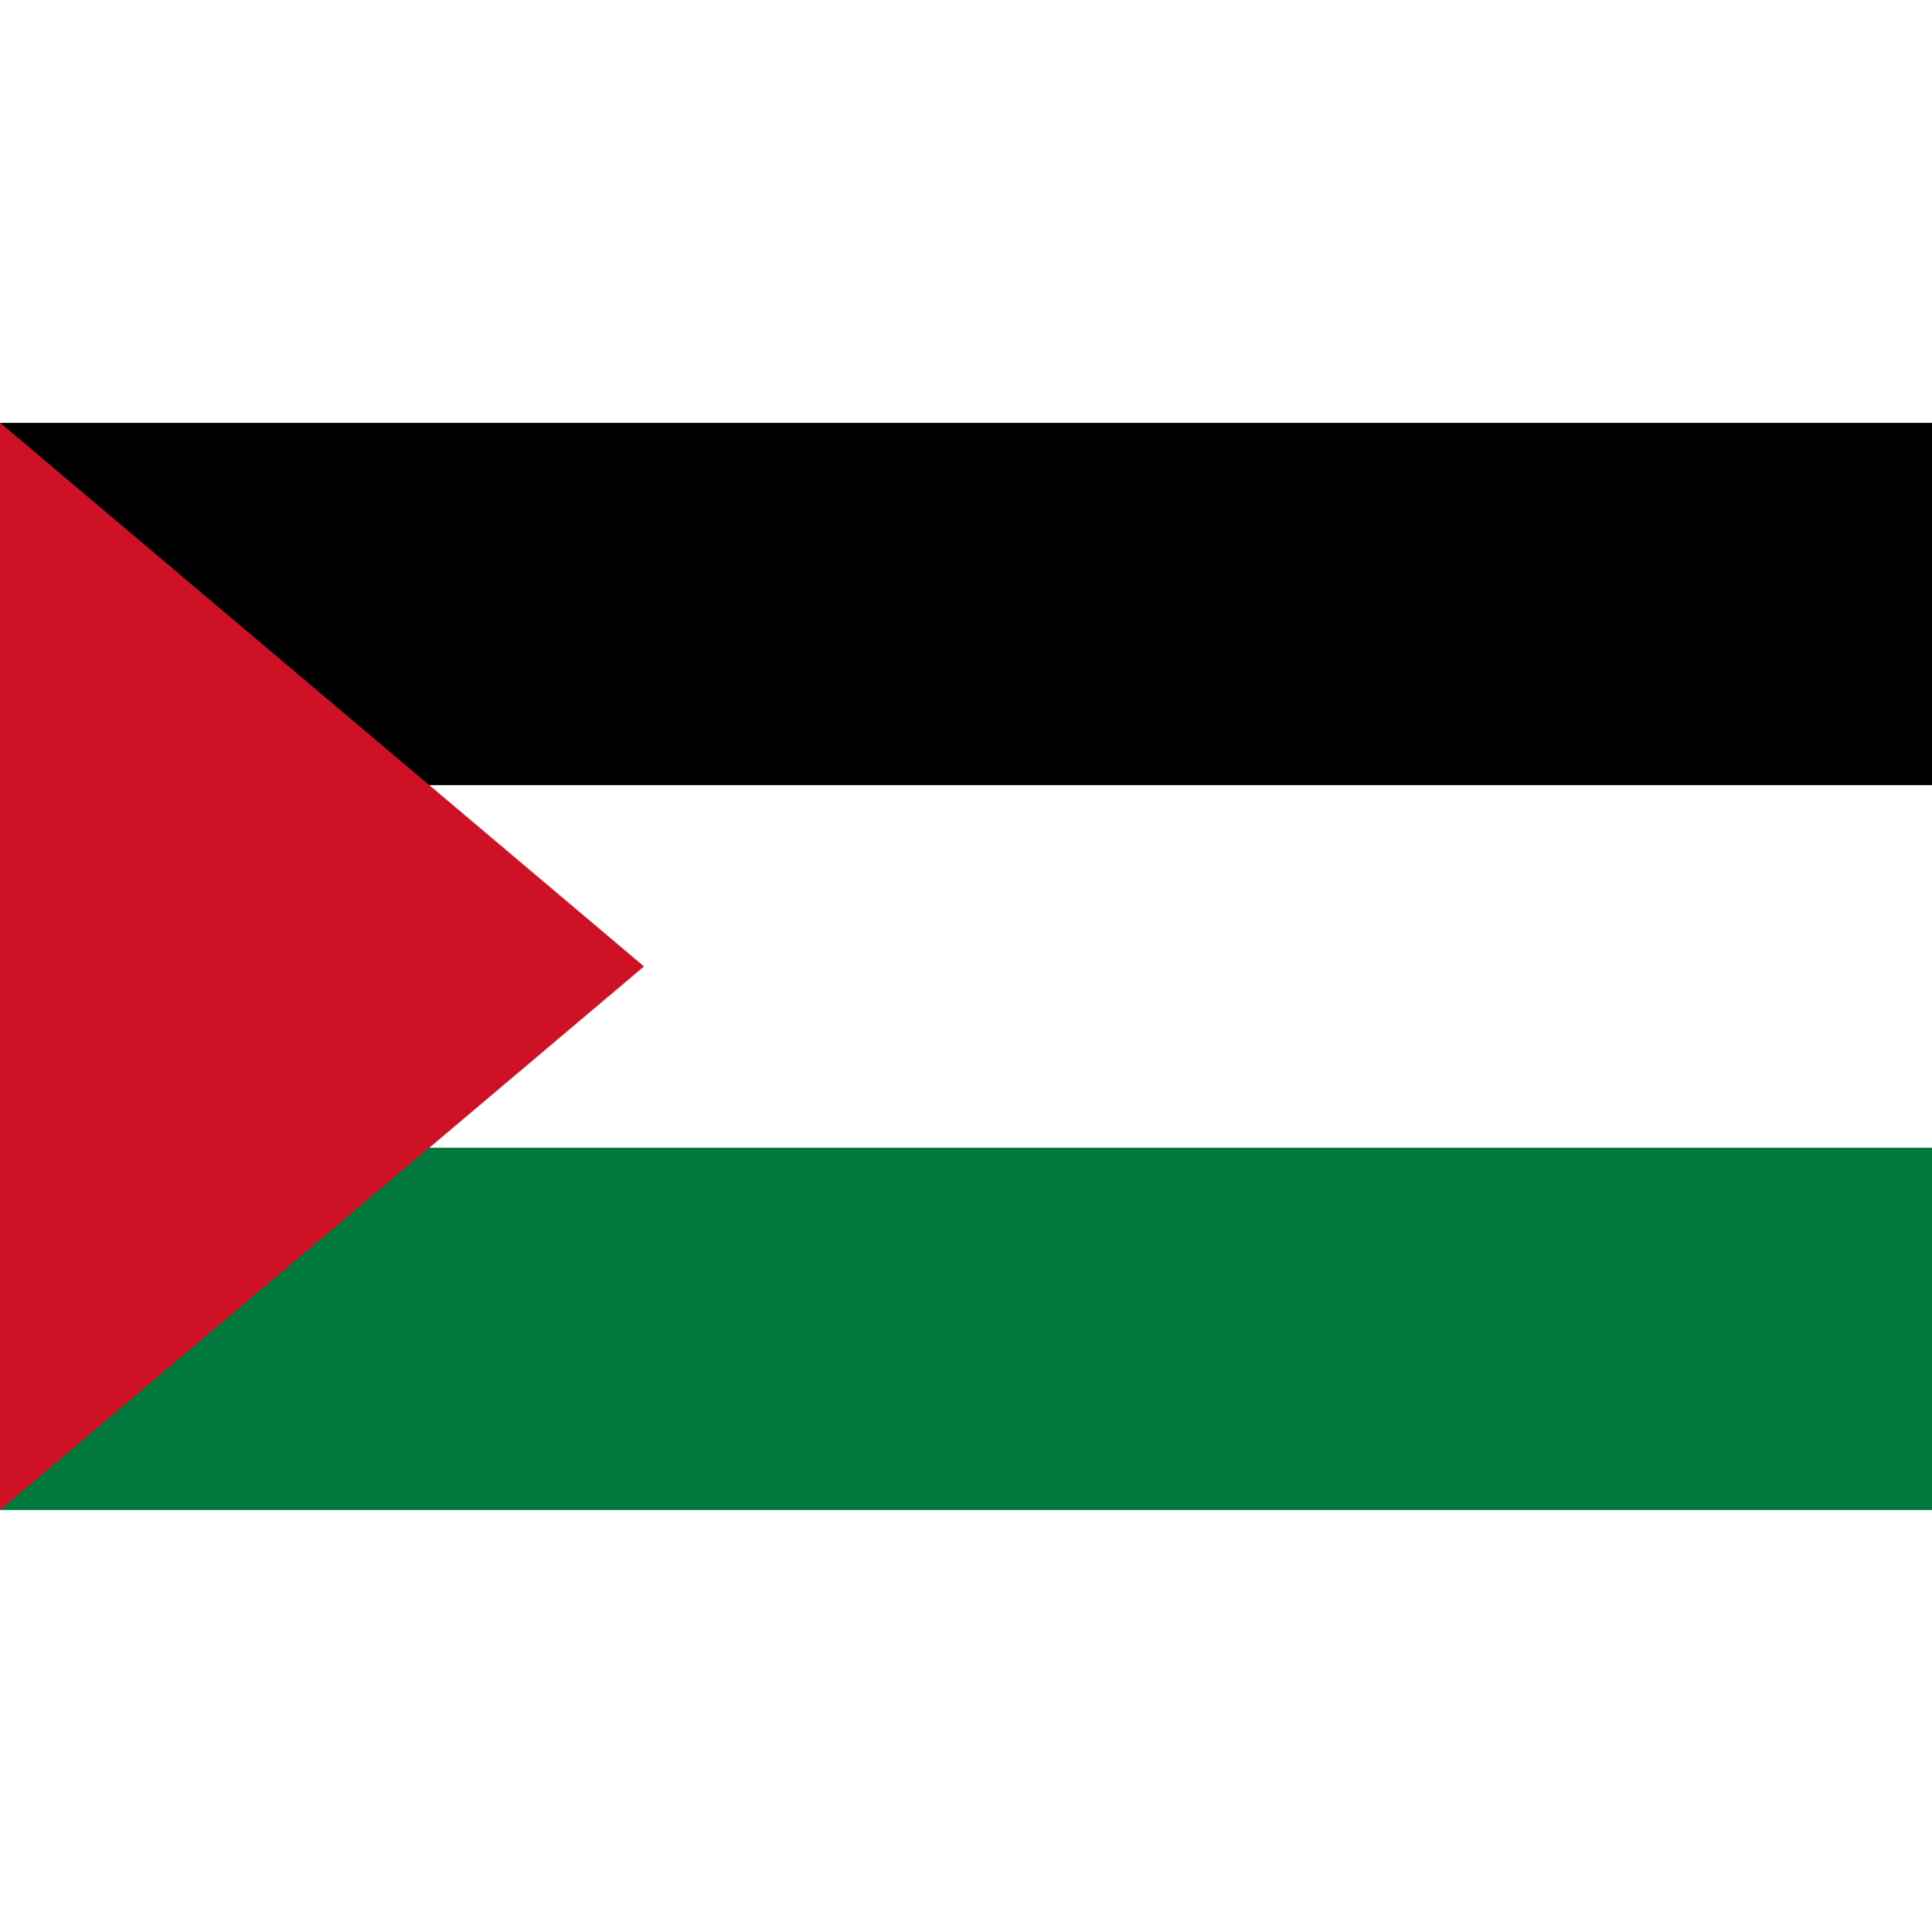 The Palestinian flag has three equal horizontal bands in black, white and green overlaid by a red triangle on the left side.